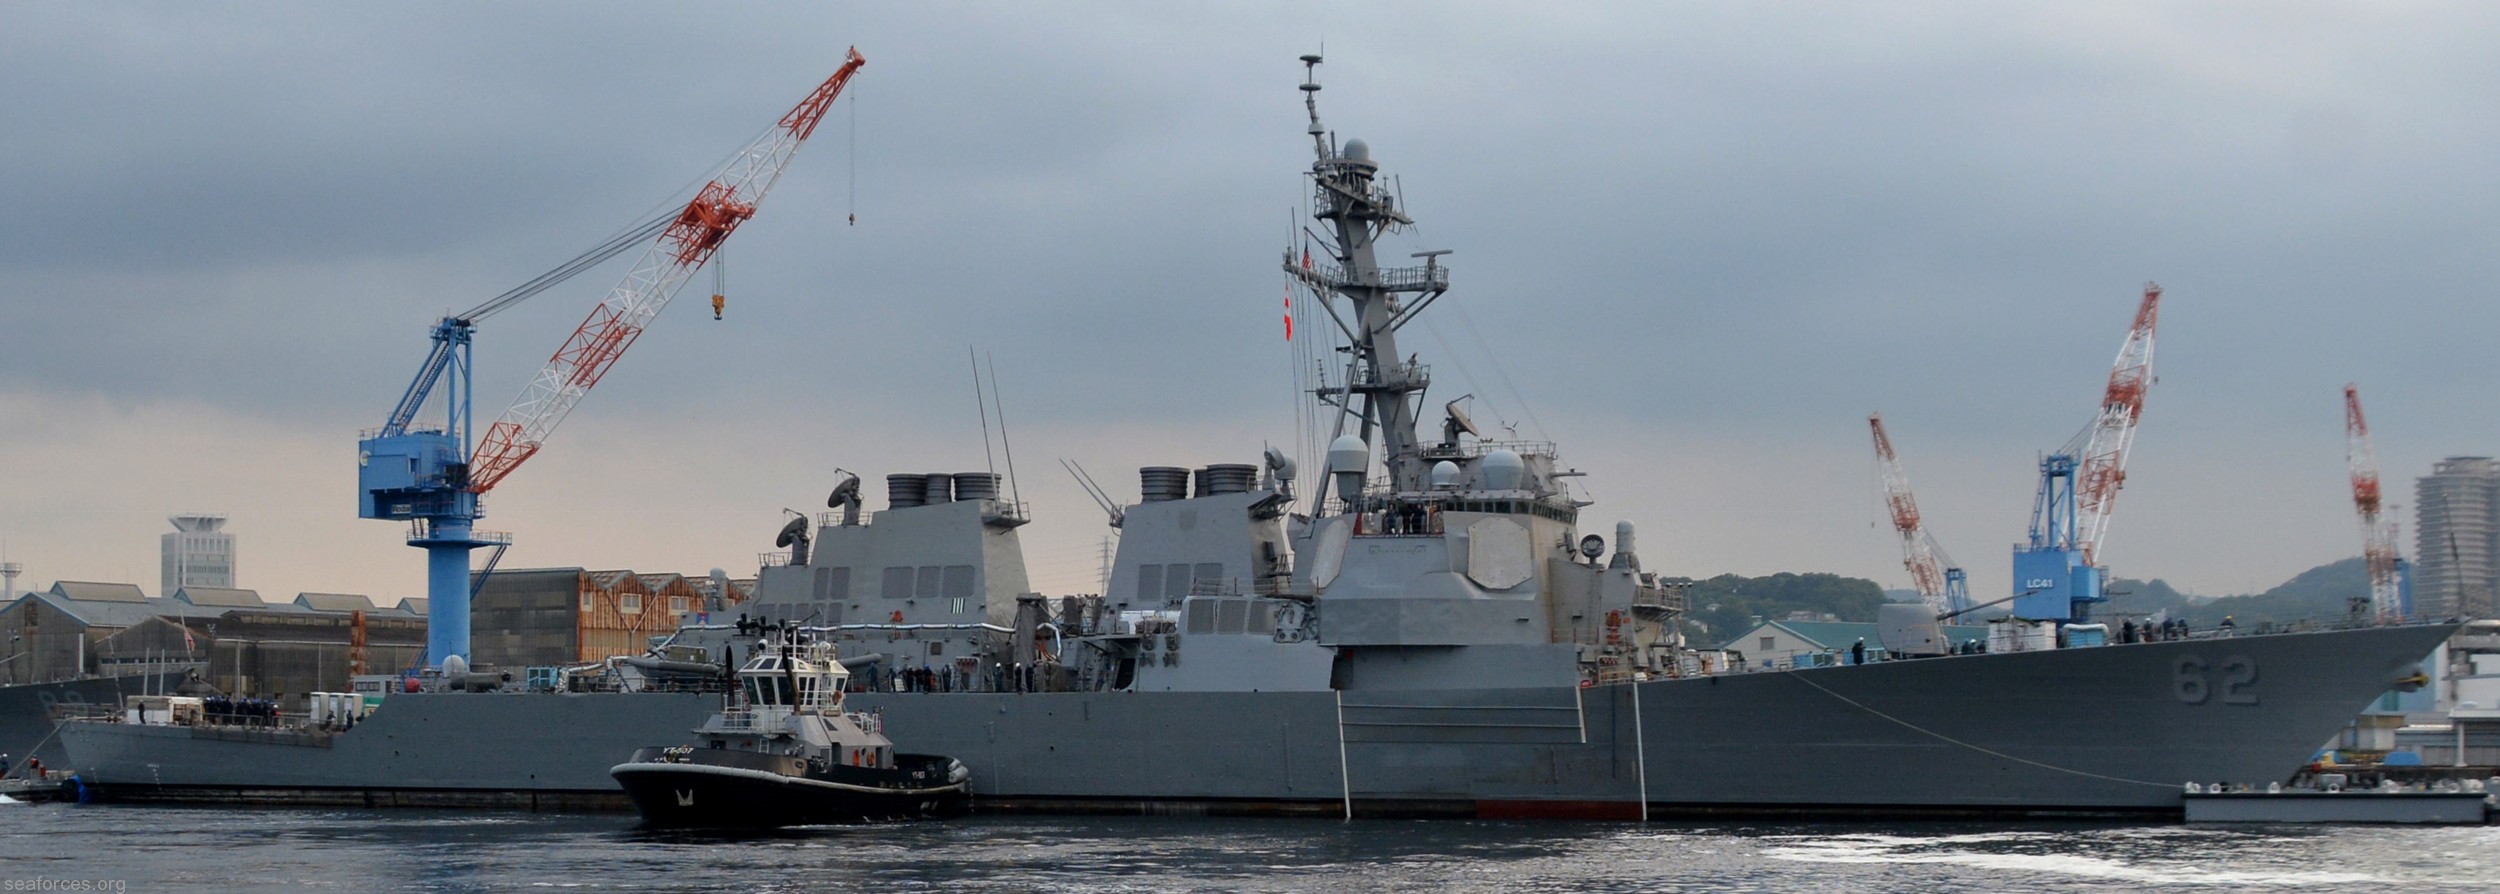 ddg-62 uss fitzgerald guided missile destroyer us navy 140 yokosuka repairs